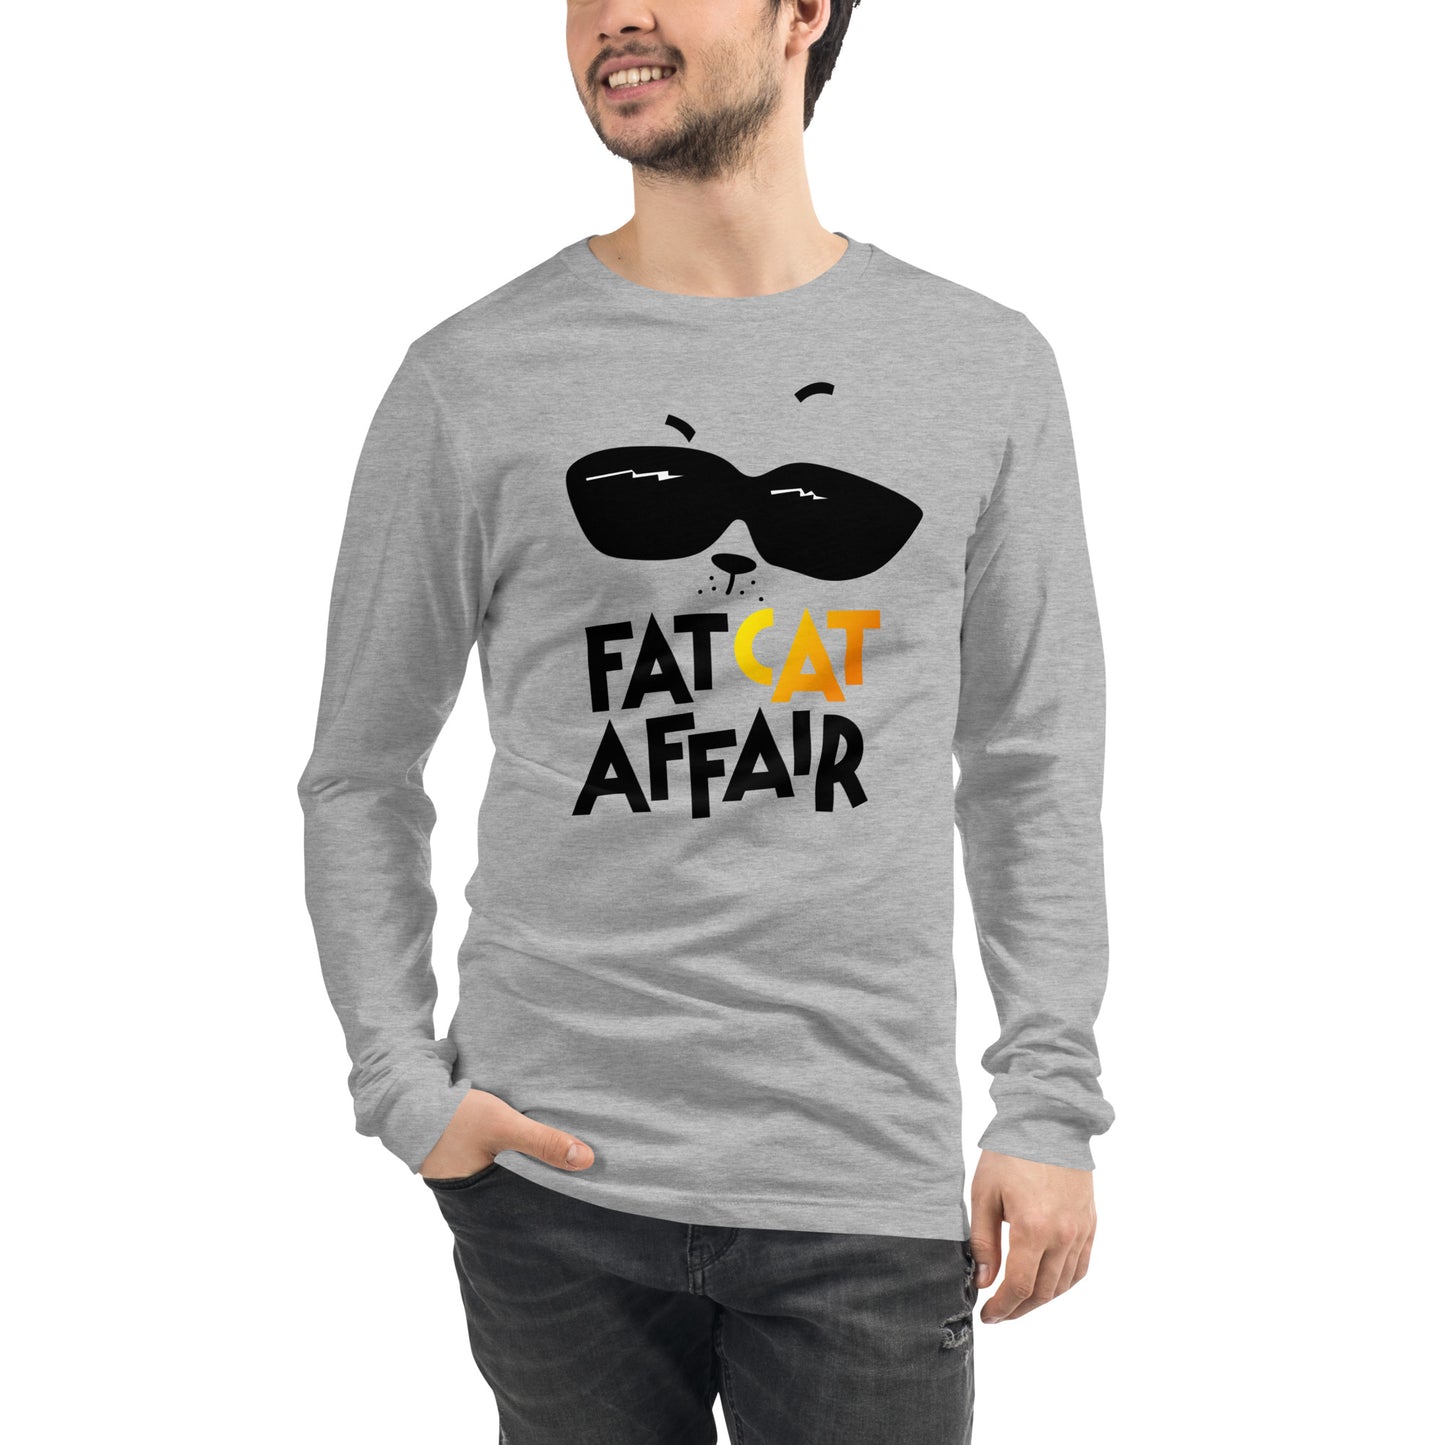 men's gray long sleeve top with cat print